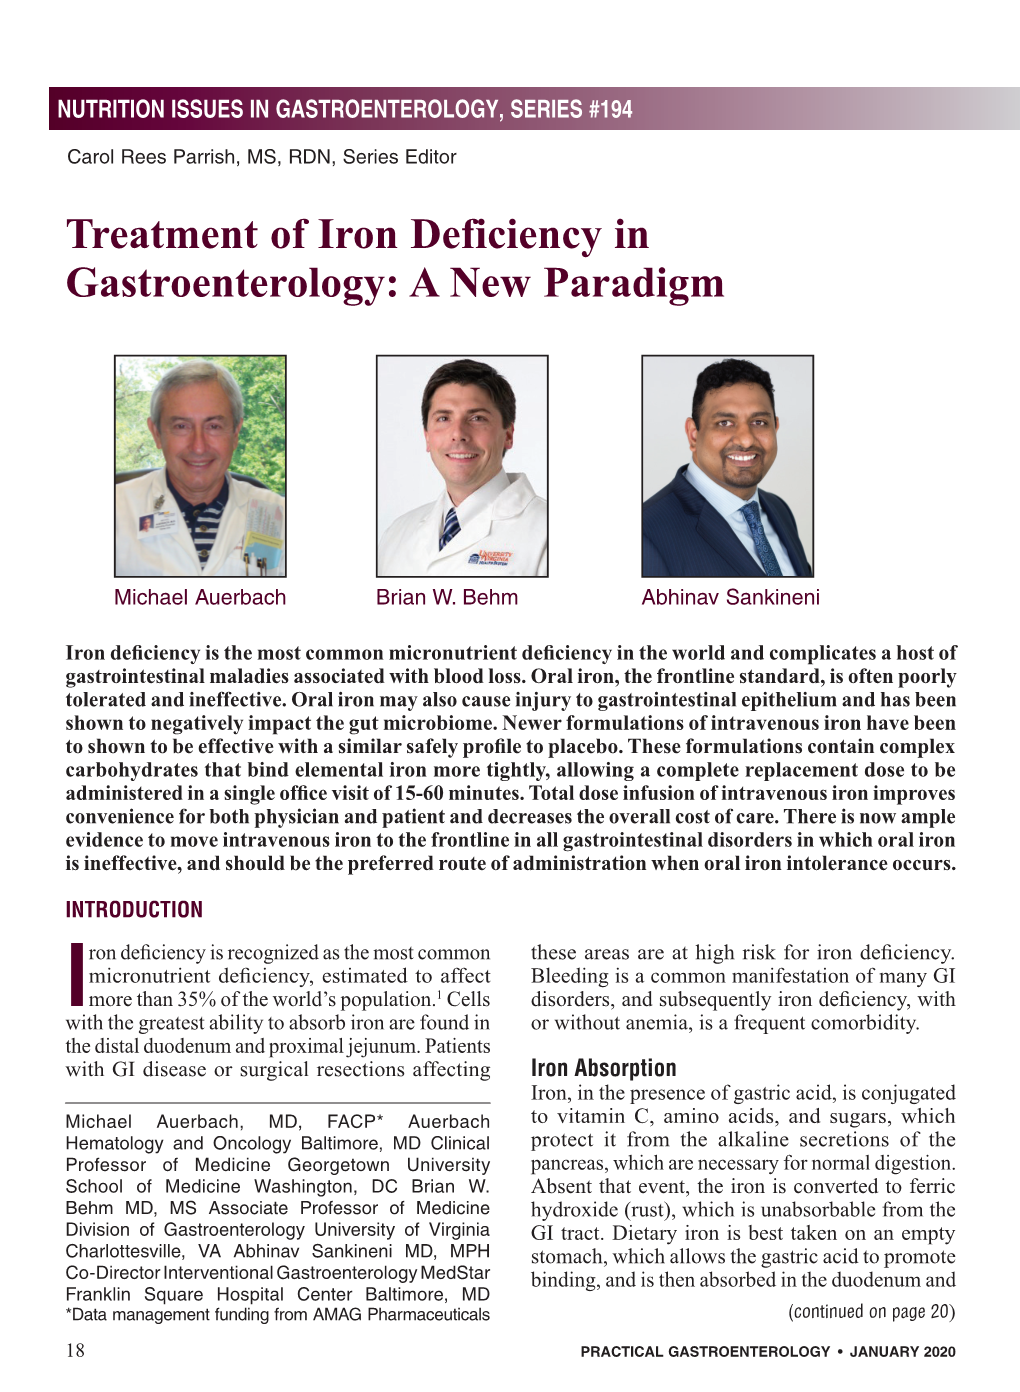 Treatment of Iron Deficiency in Gastroenterology: a New Paradigm